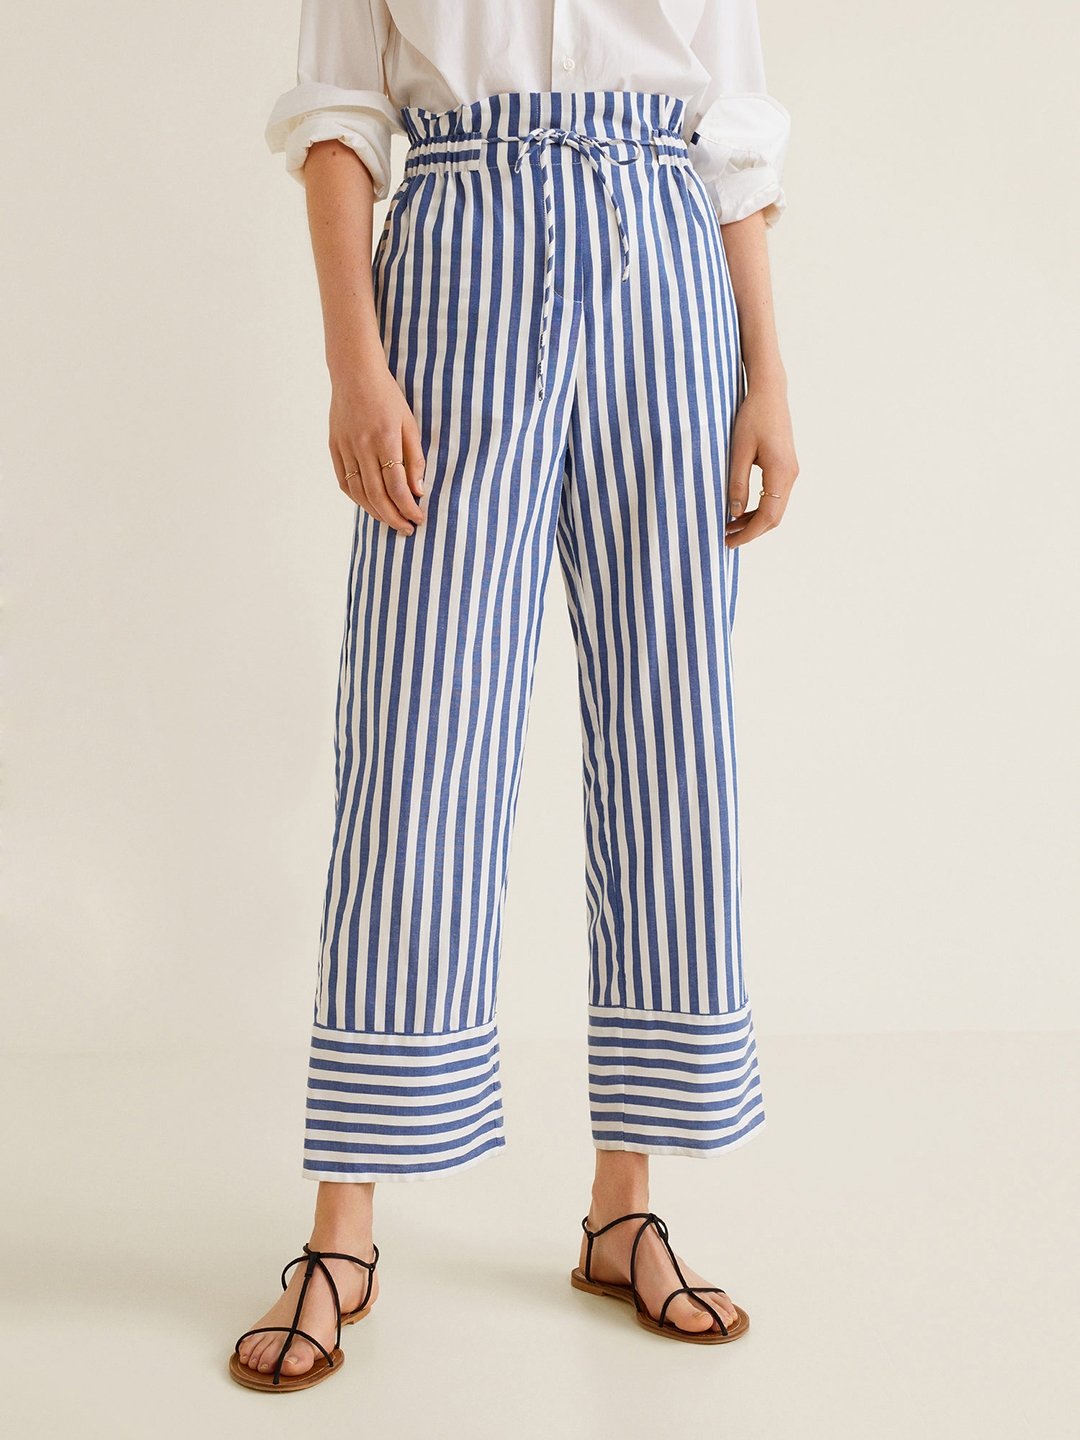 Buy ALL Plus Size Women Navy Blue White Regular Fit Striped Trousers   Trousers for Women 9315763  Myntra